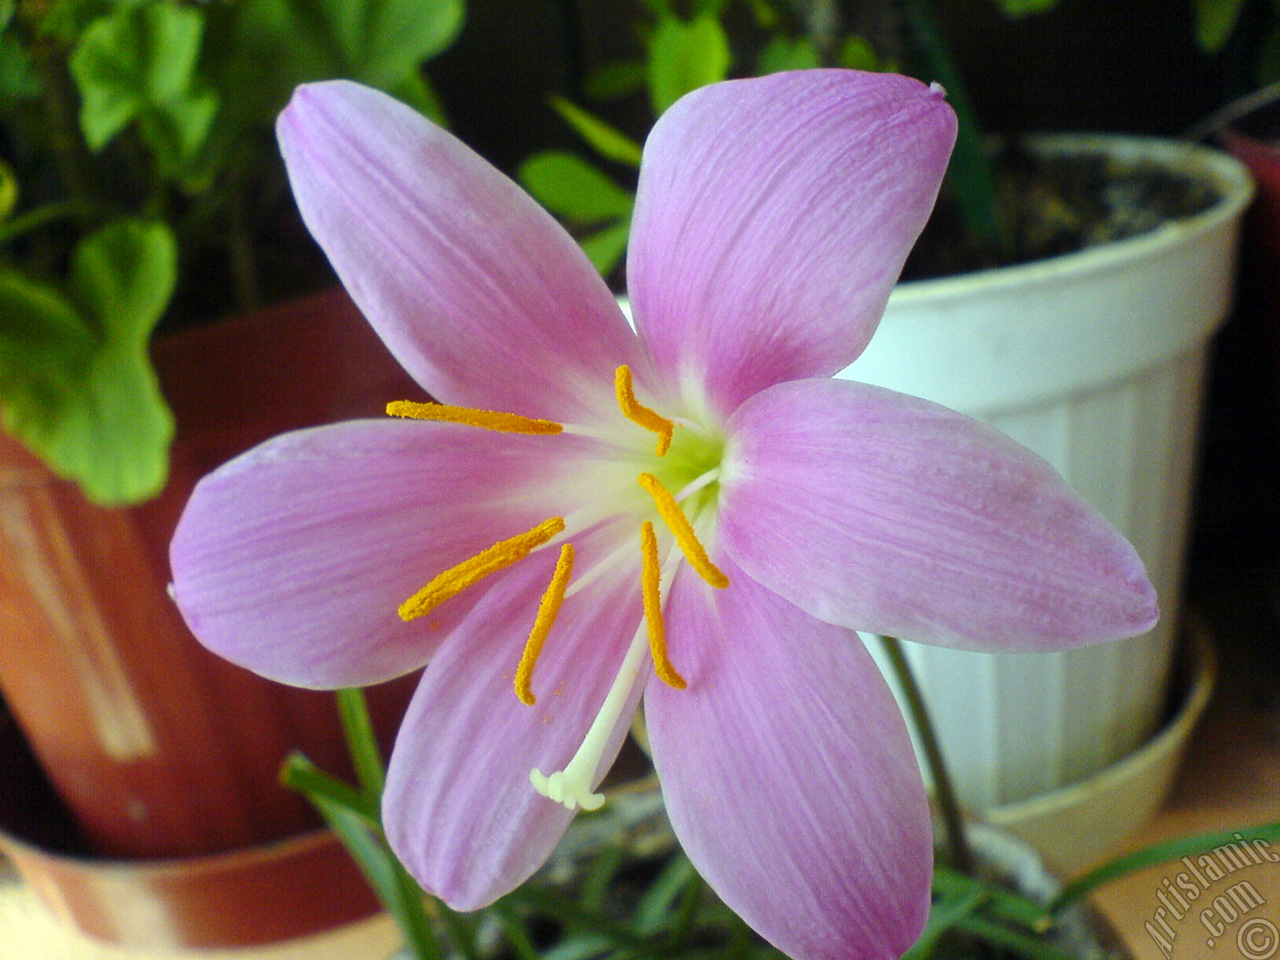 Pink color flower similar to lily.
